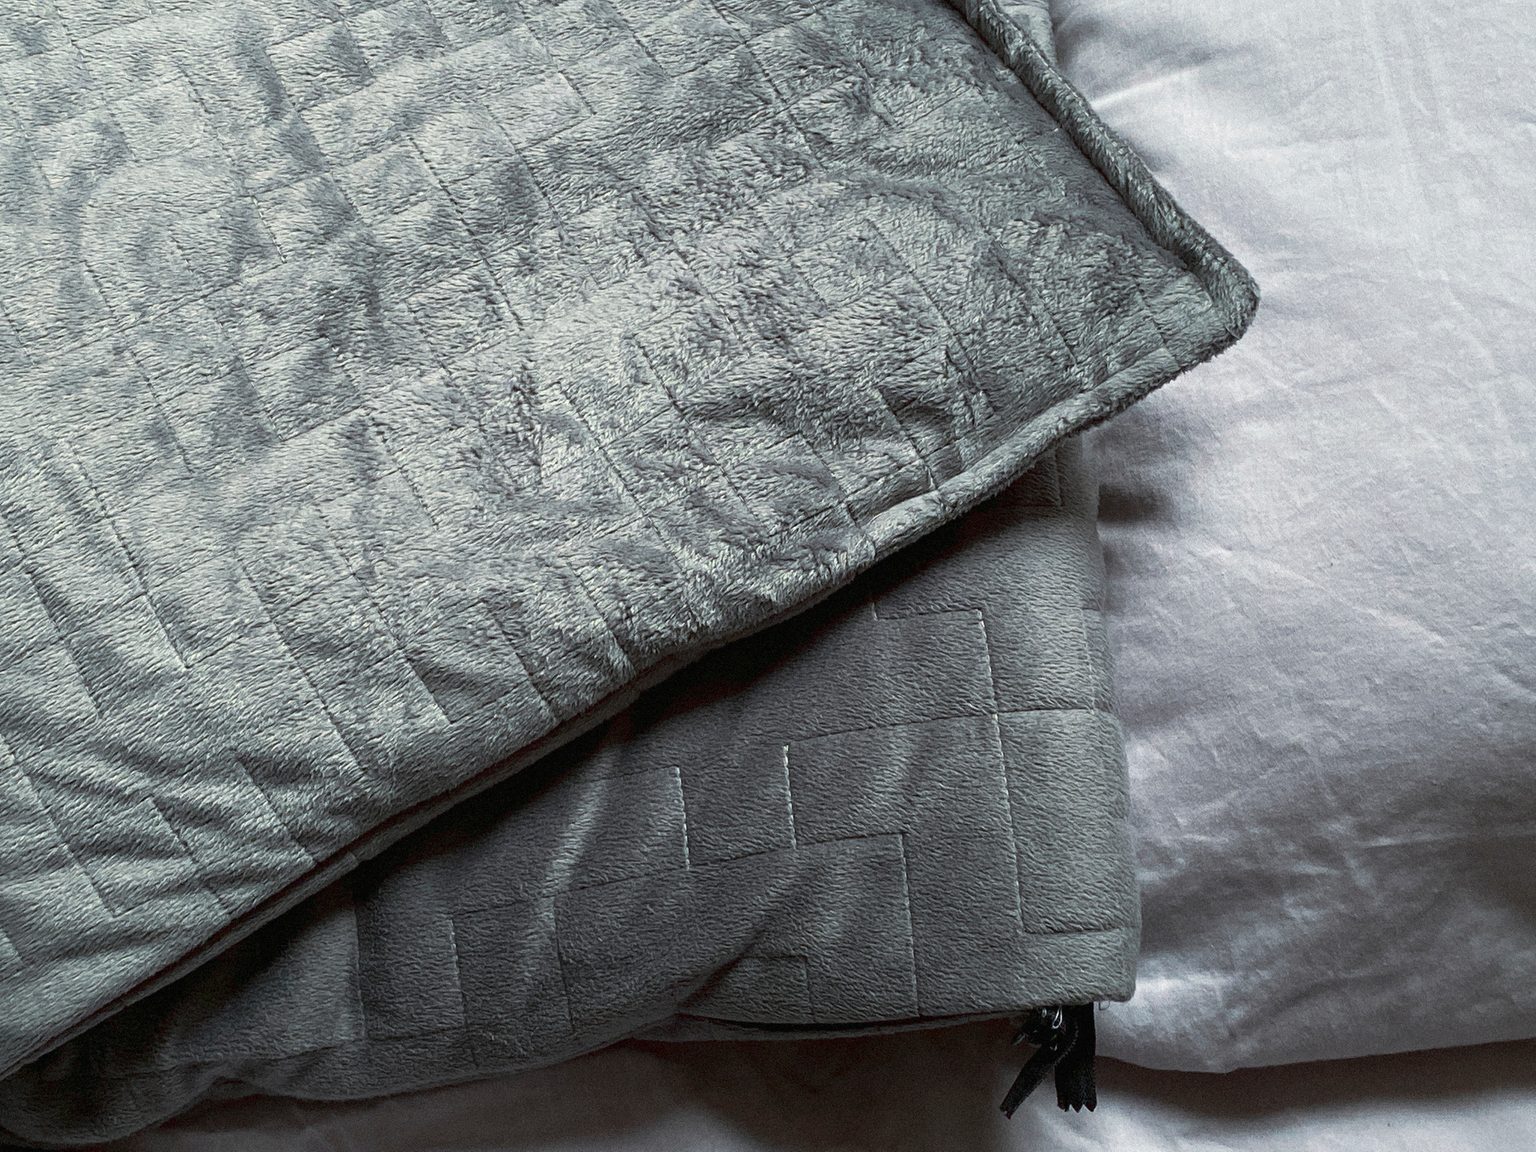 How to Wash a Weighted Blanket, According to Experts | The Healthy